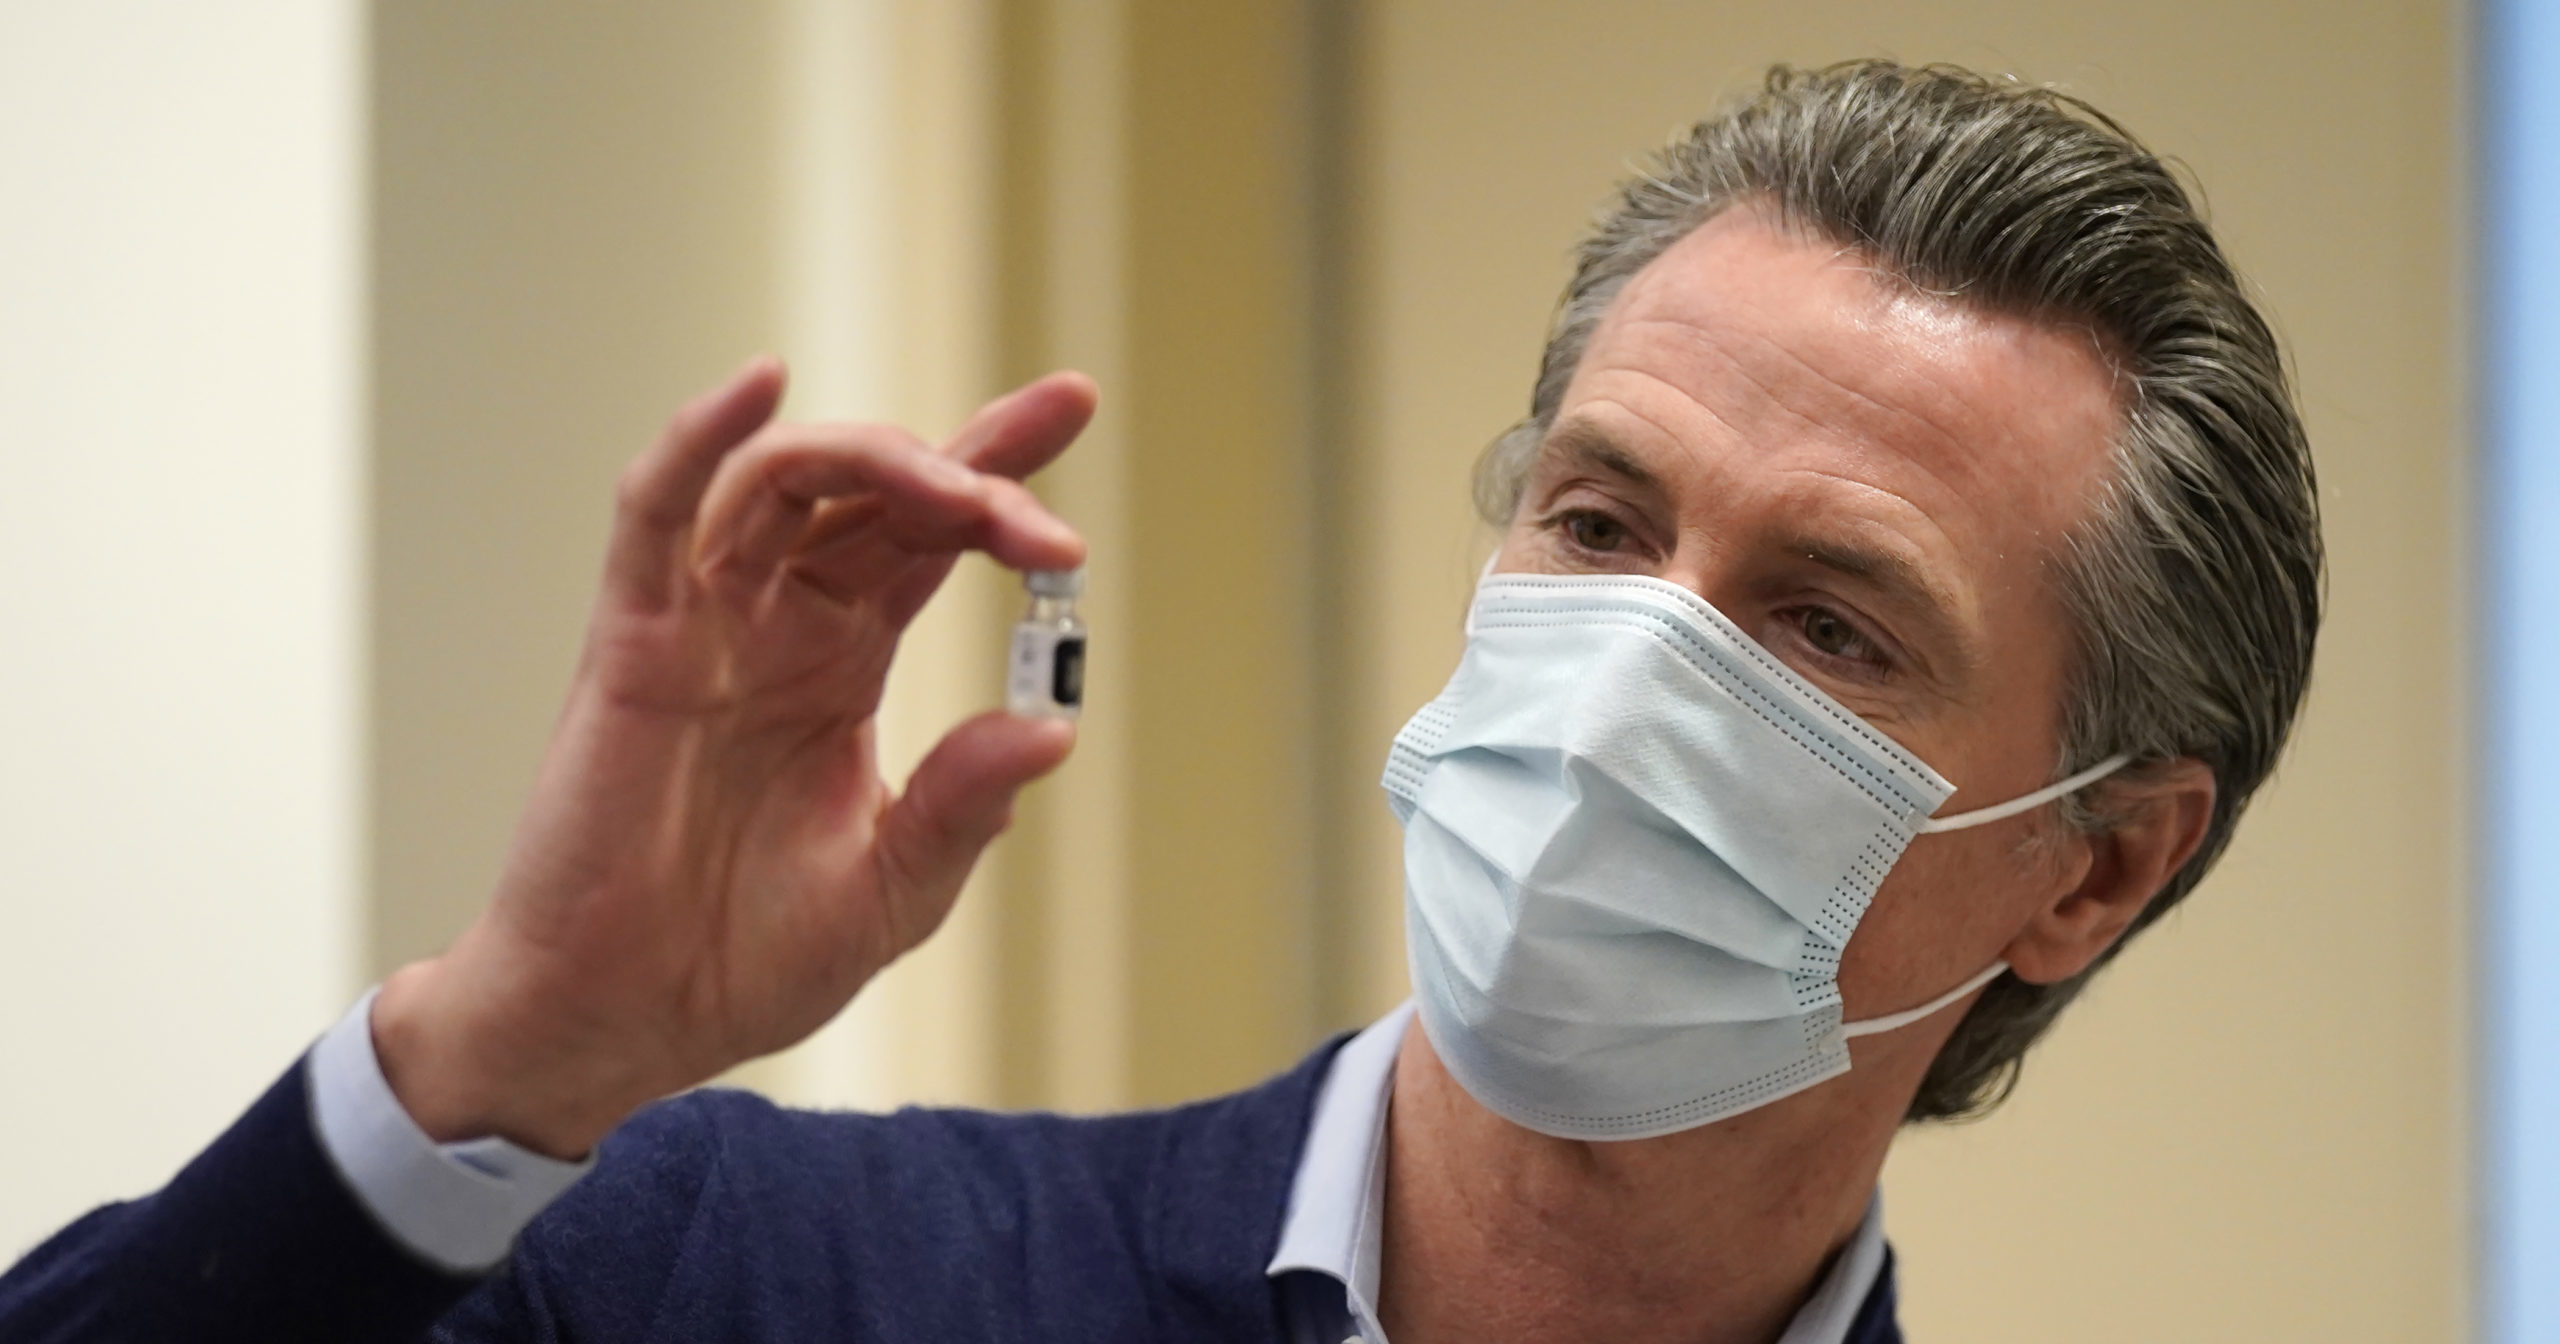 California Gov. Gavin Newsom holds up a vial of the Pfizer-BioNTech COVID-19 vaccine at Kaiser Permanente Los Angeles Medical Center in Los Angeles on Dec. 14, 2020.